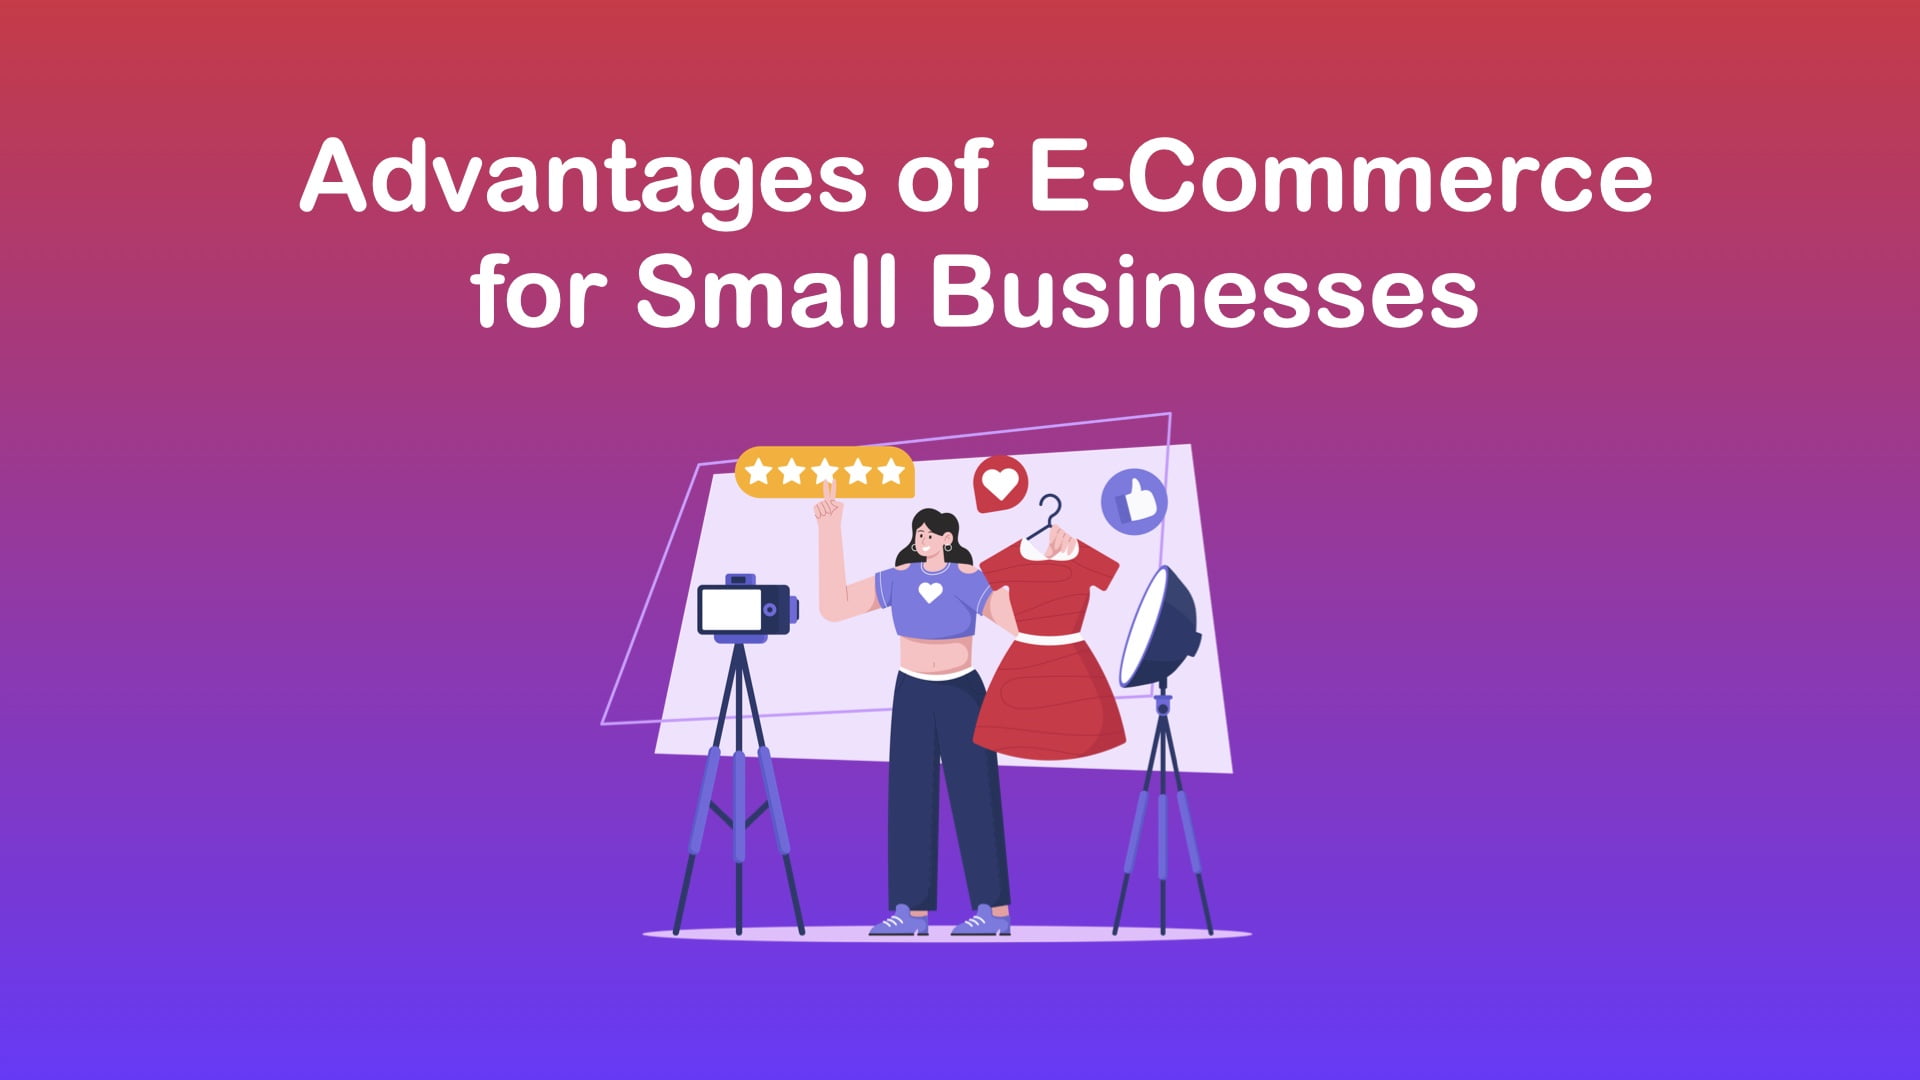 8 Advantages of E-Commerce for Small Businesses & Startups in Singapore